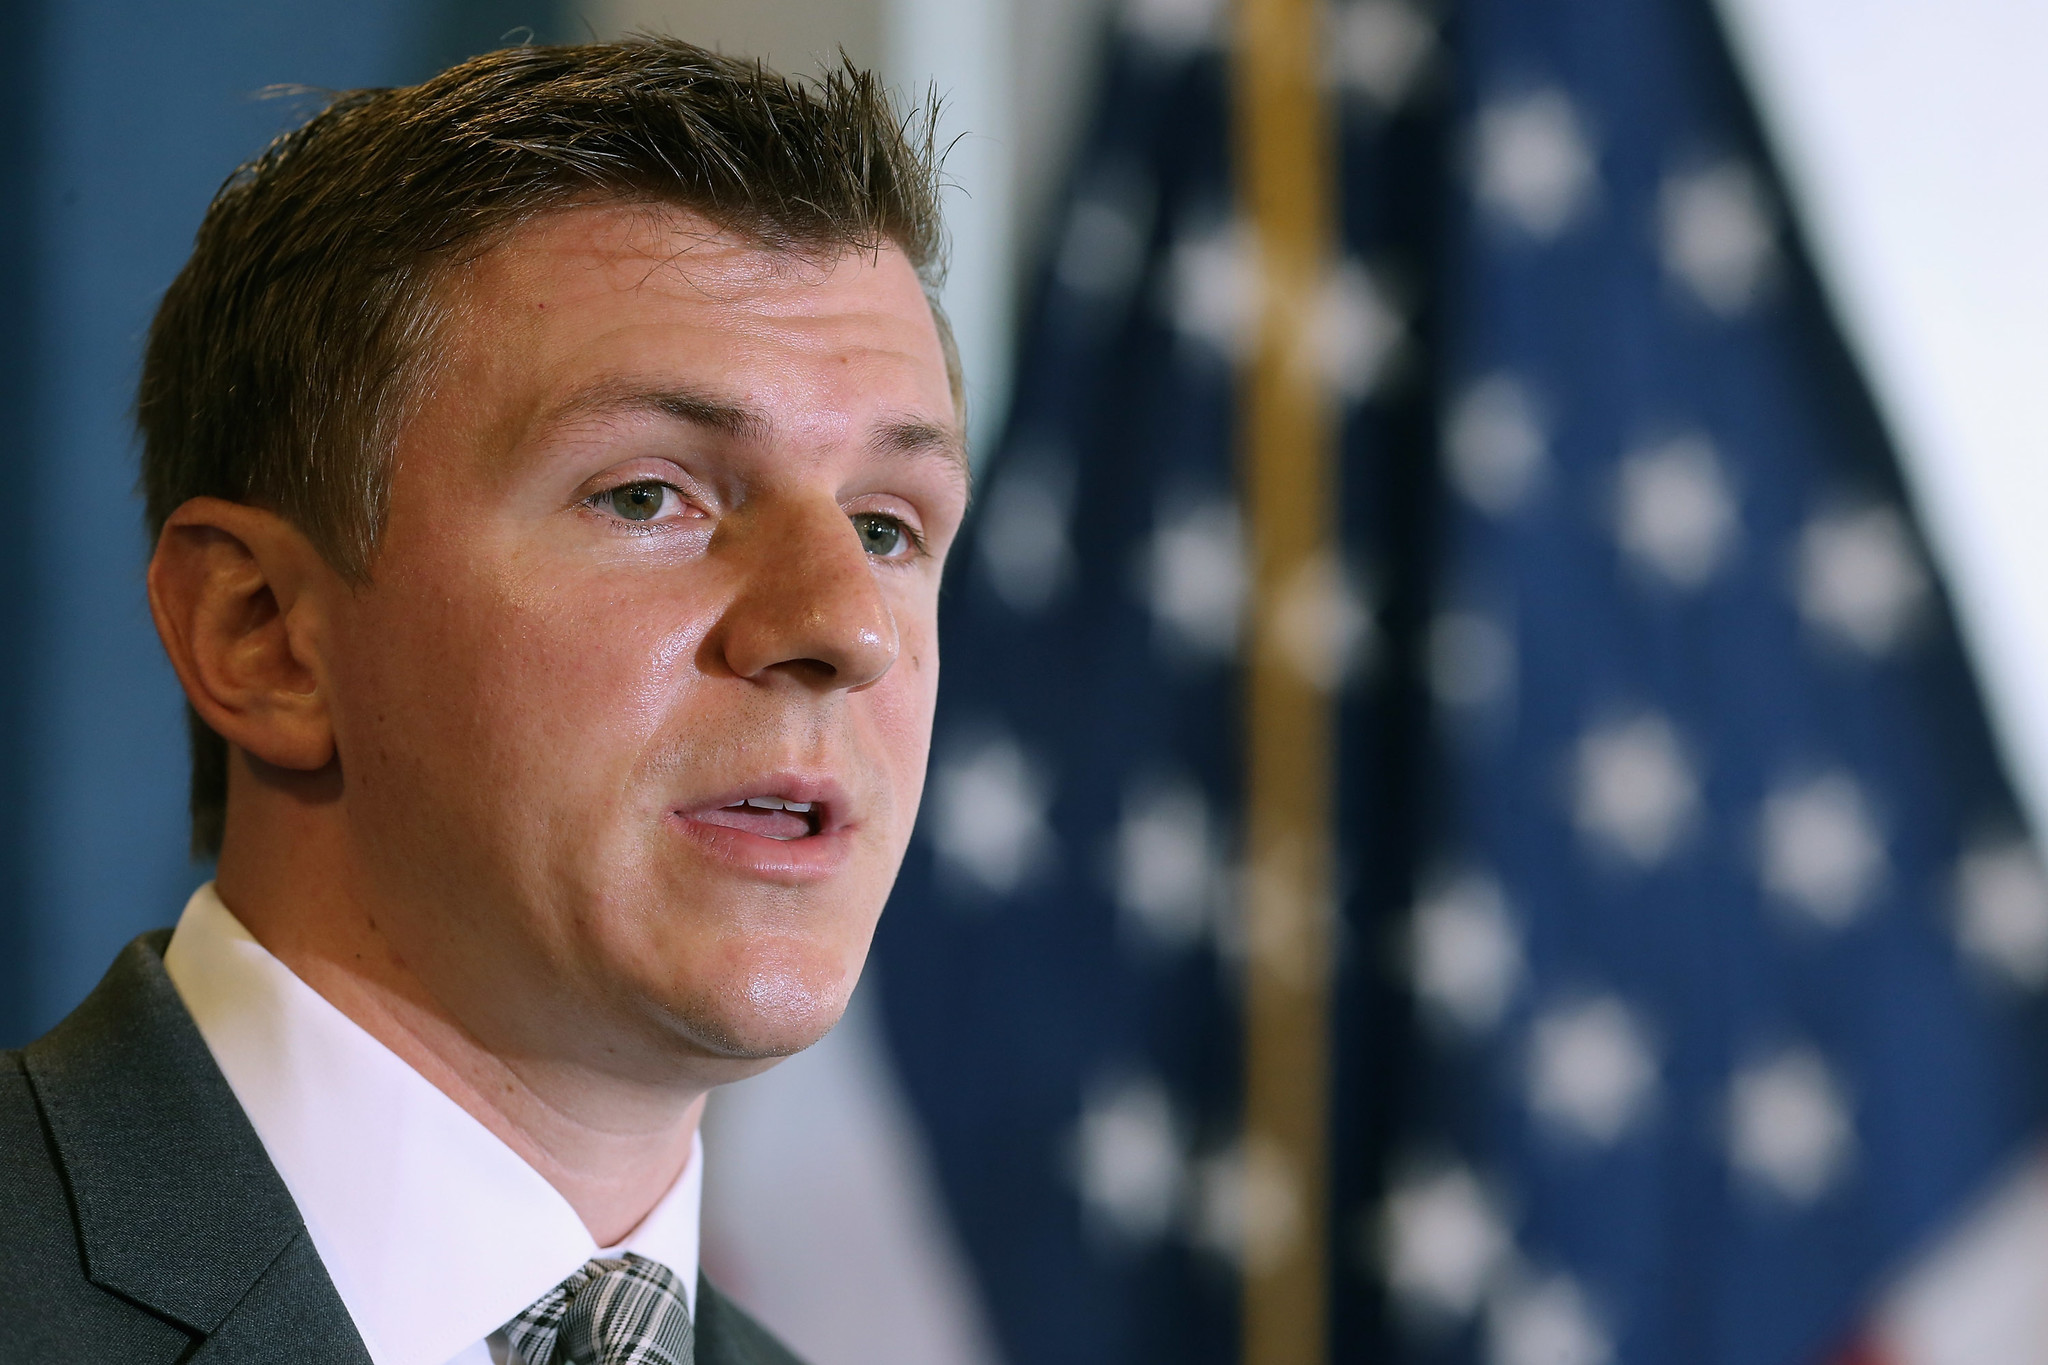 Conservative undercover journalist James O'Keefe holds a news conference at the National Press Club in 2015.